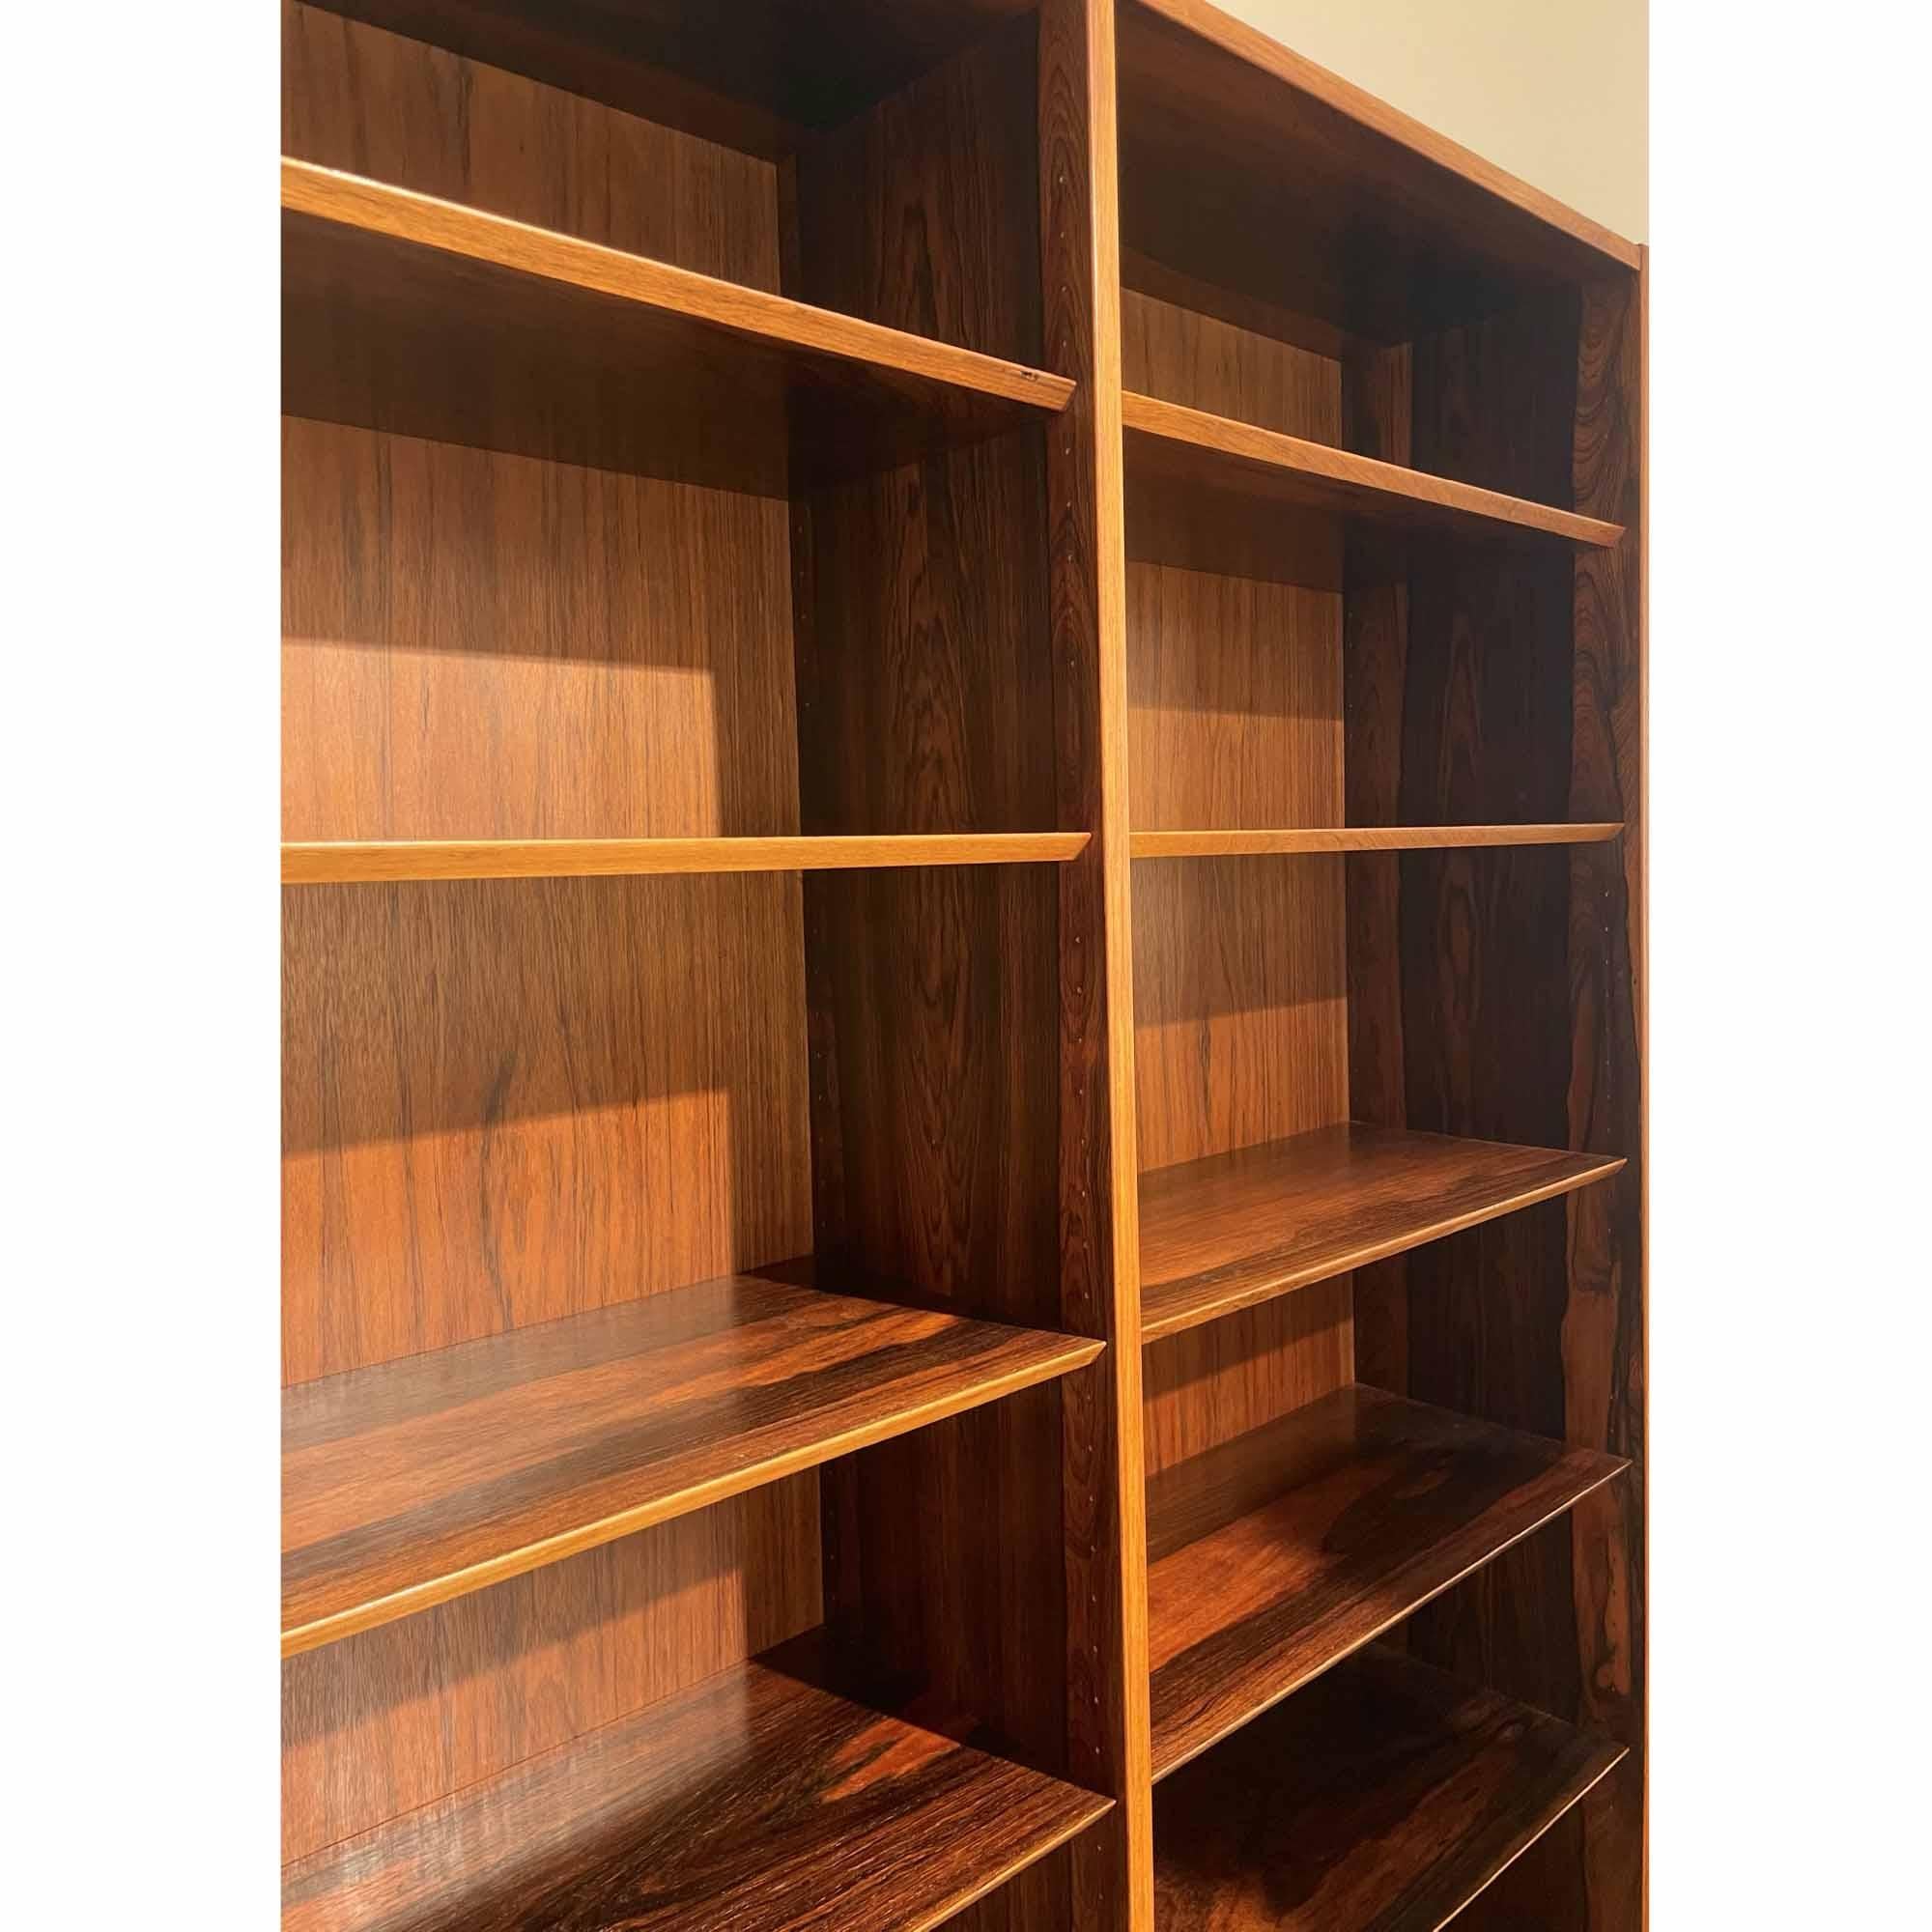 Very refined vintage rosewood bookcase with a beautiful, well-flamed wood grain, and high manufacturing quality.
Particular attention to detail, the beveled edges of the lighter shelves, as well as the edges of the vertical uprights, bring lightness